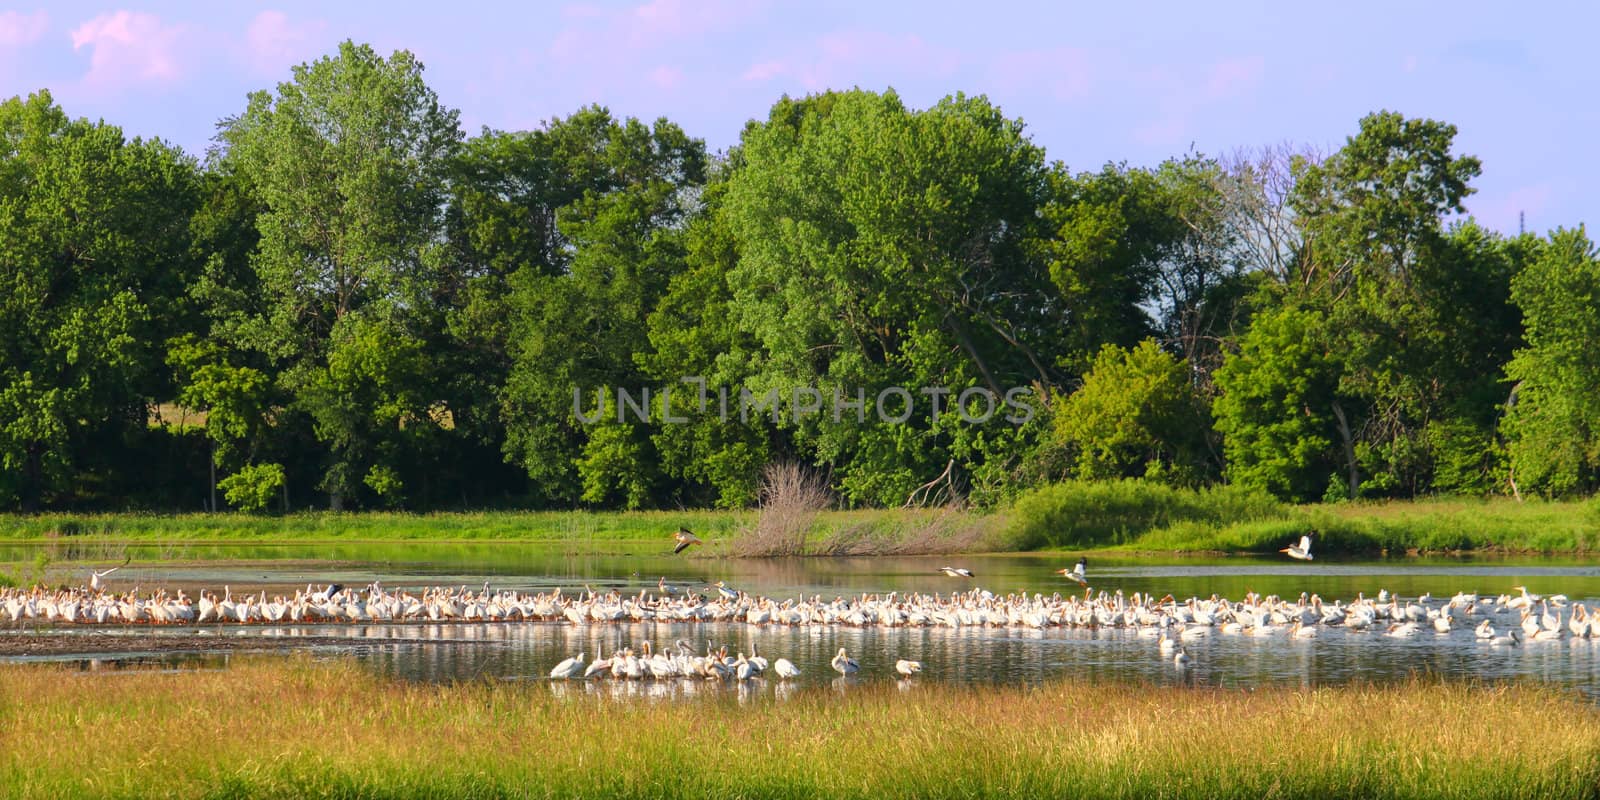 American White Pelicans in Illinois by Wirepec